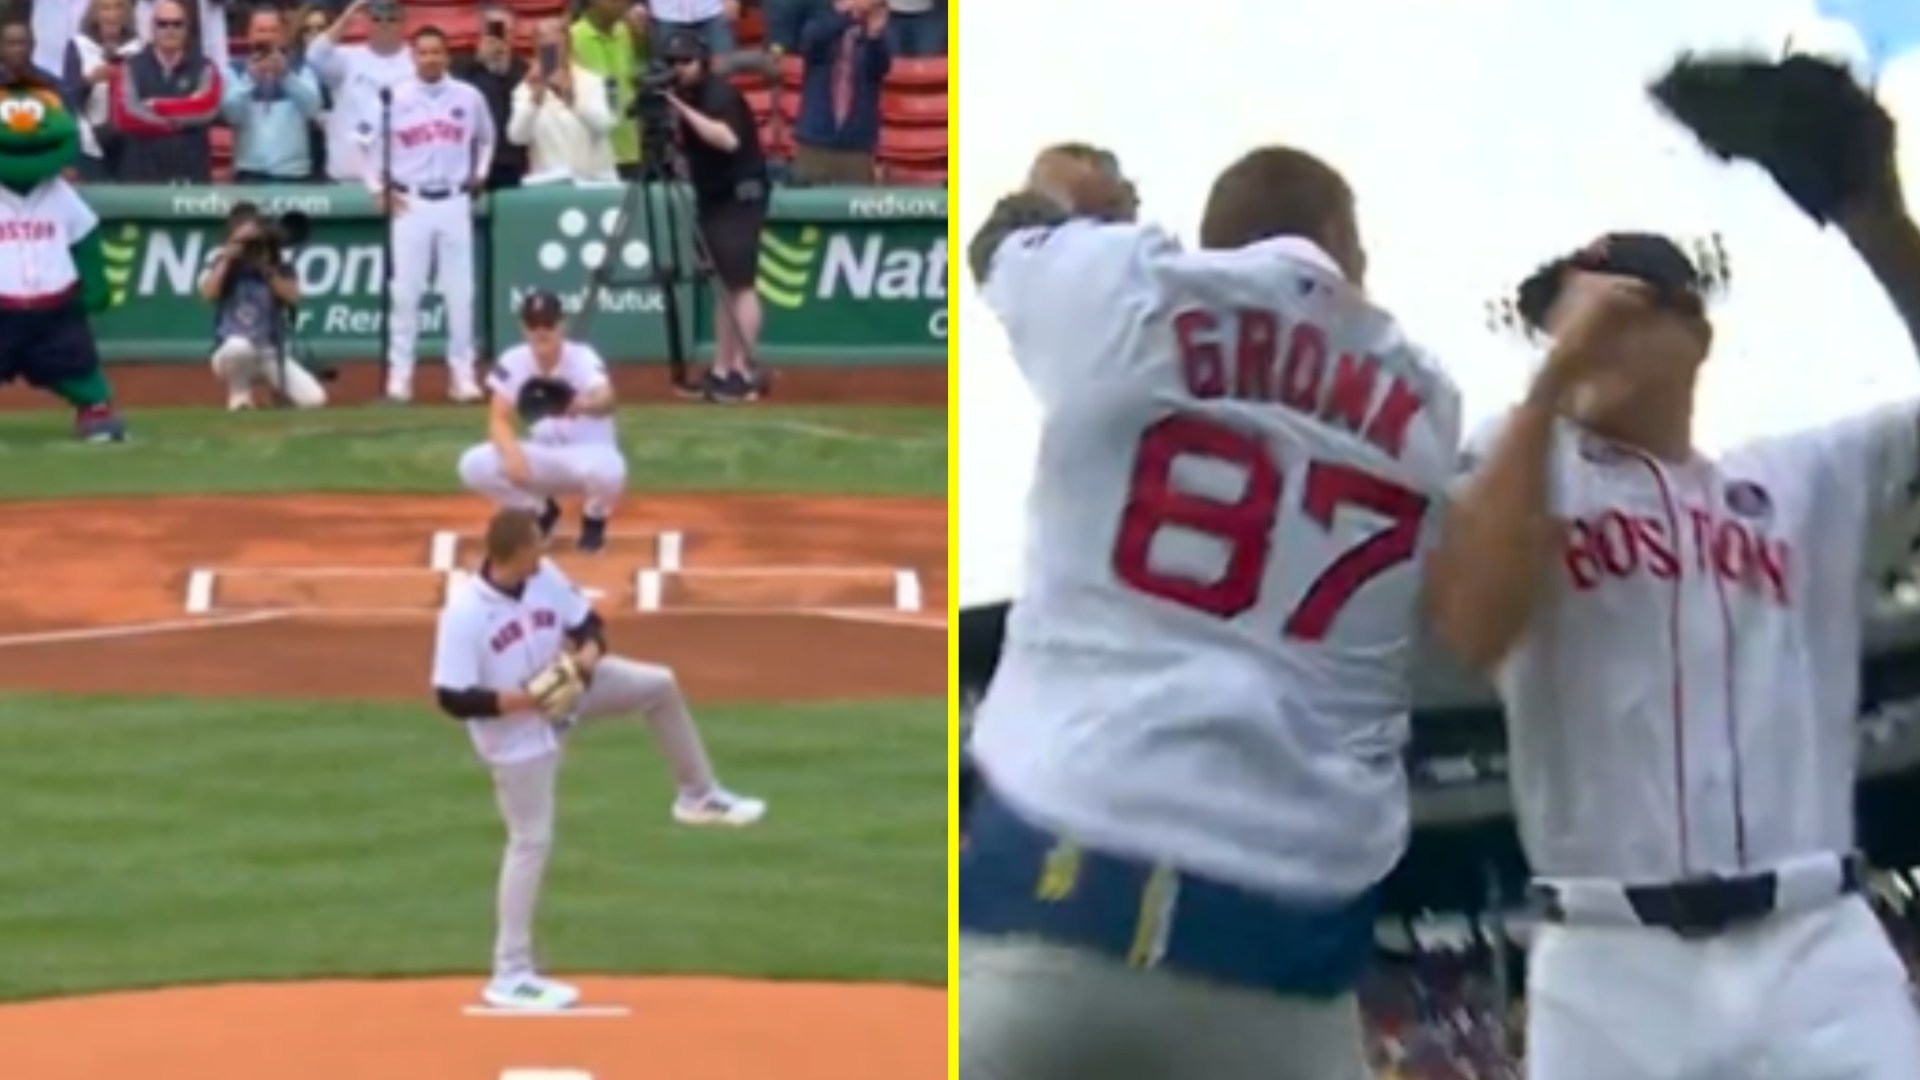 Rob Gronkowski throws the most intense first pitch in MLB history to the delight of Boston Red Sox fans at Fenway Park